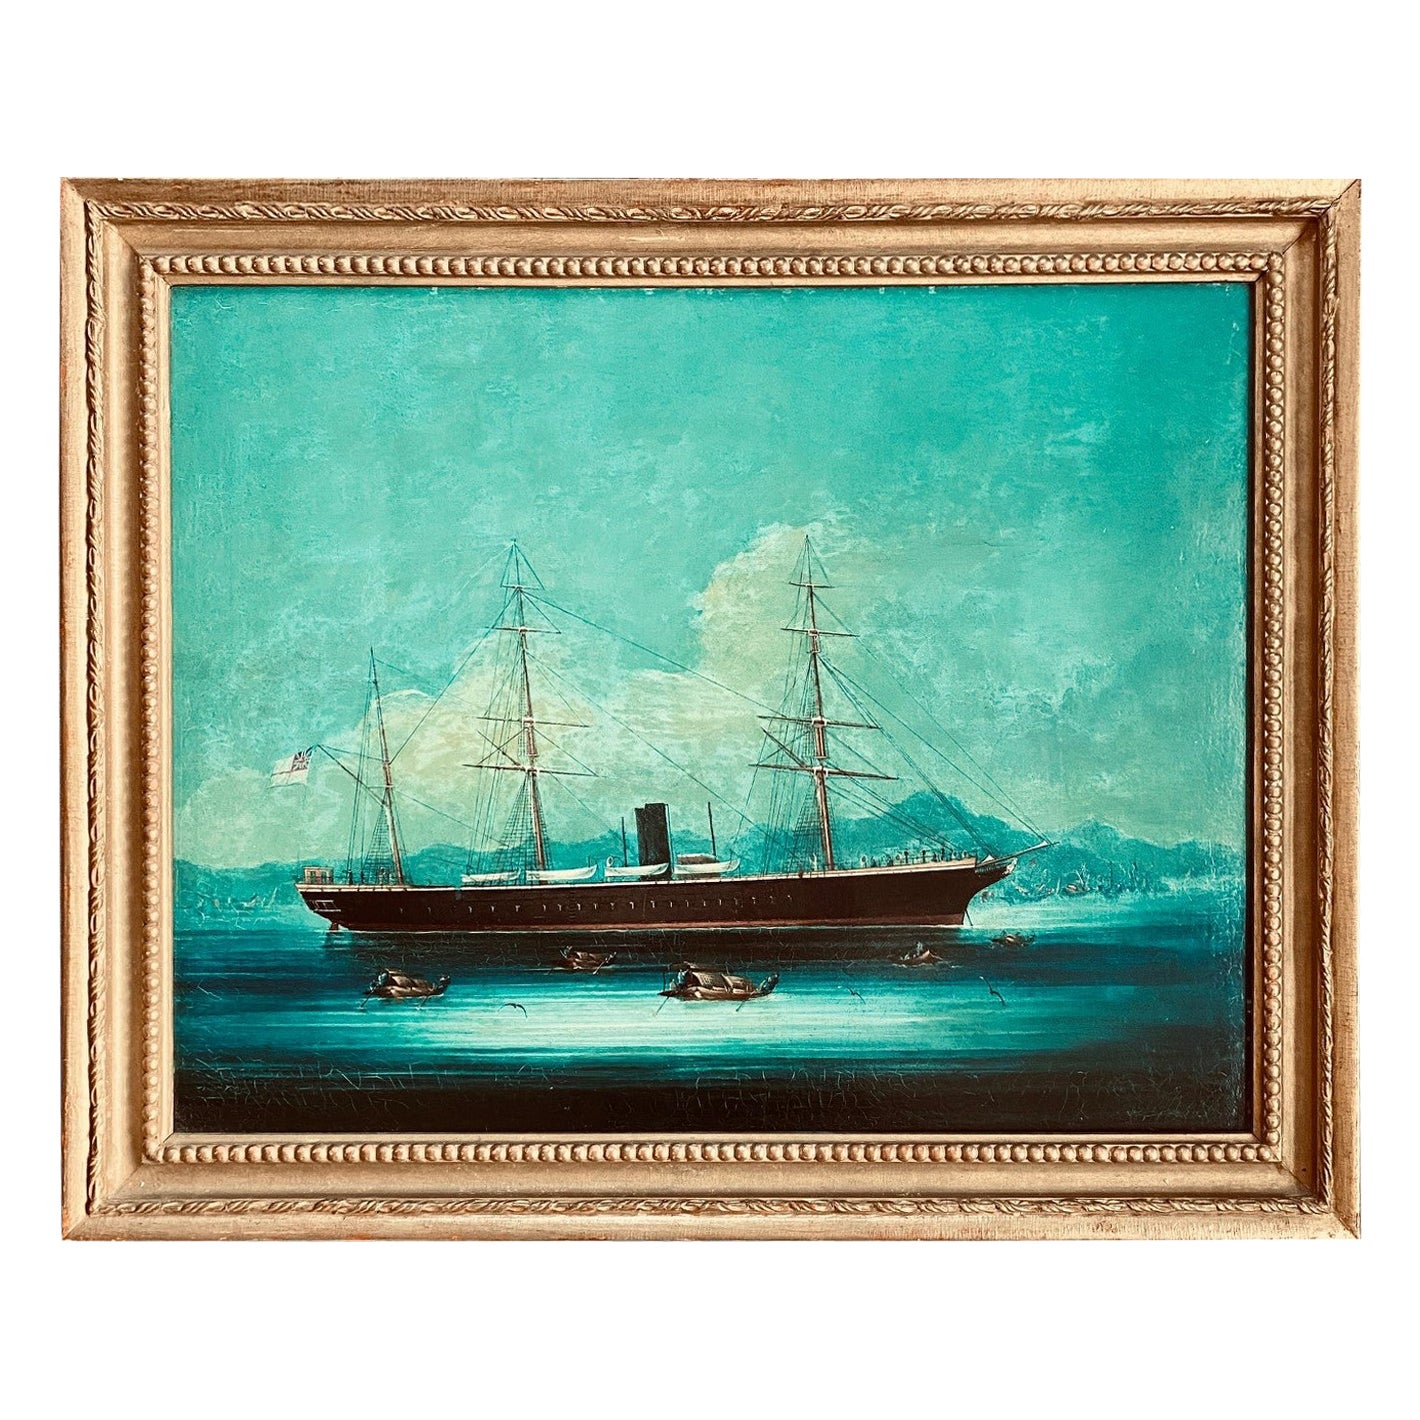 19th Century China Trade Seascape with a Tea Clipper in Hong Kong Harbor